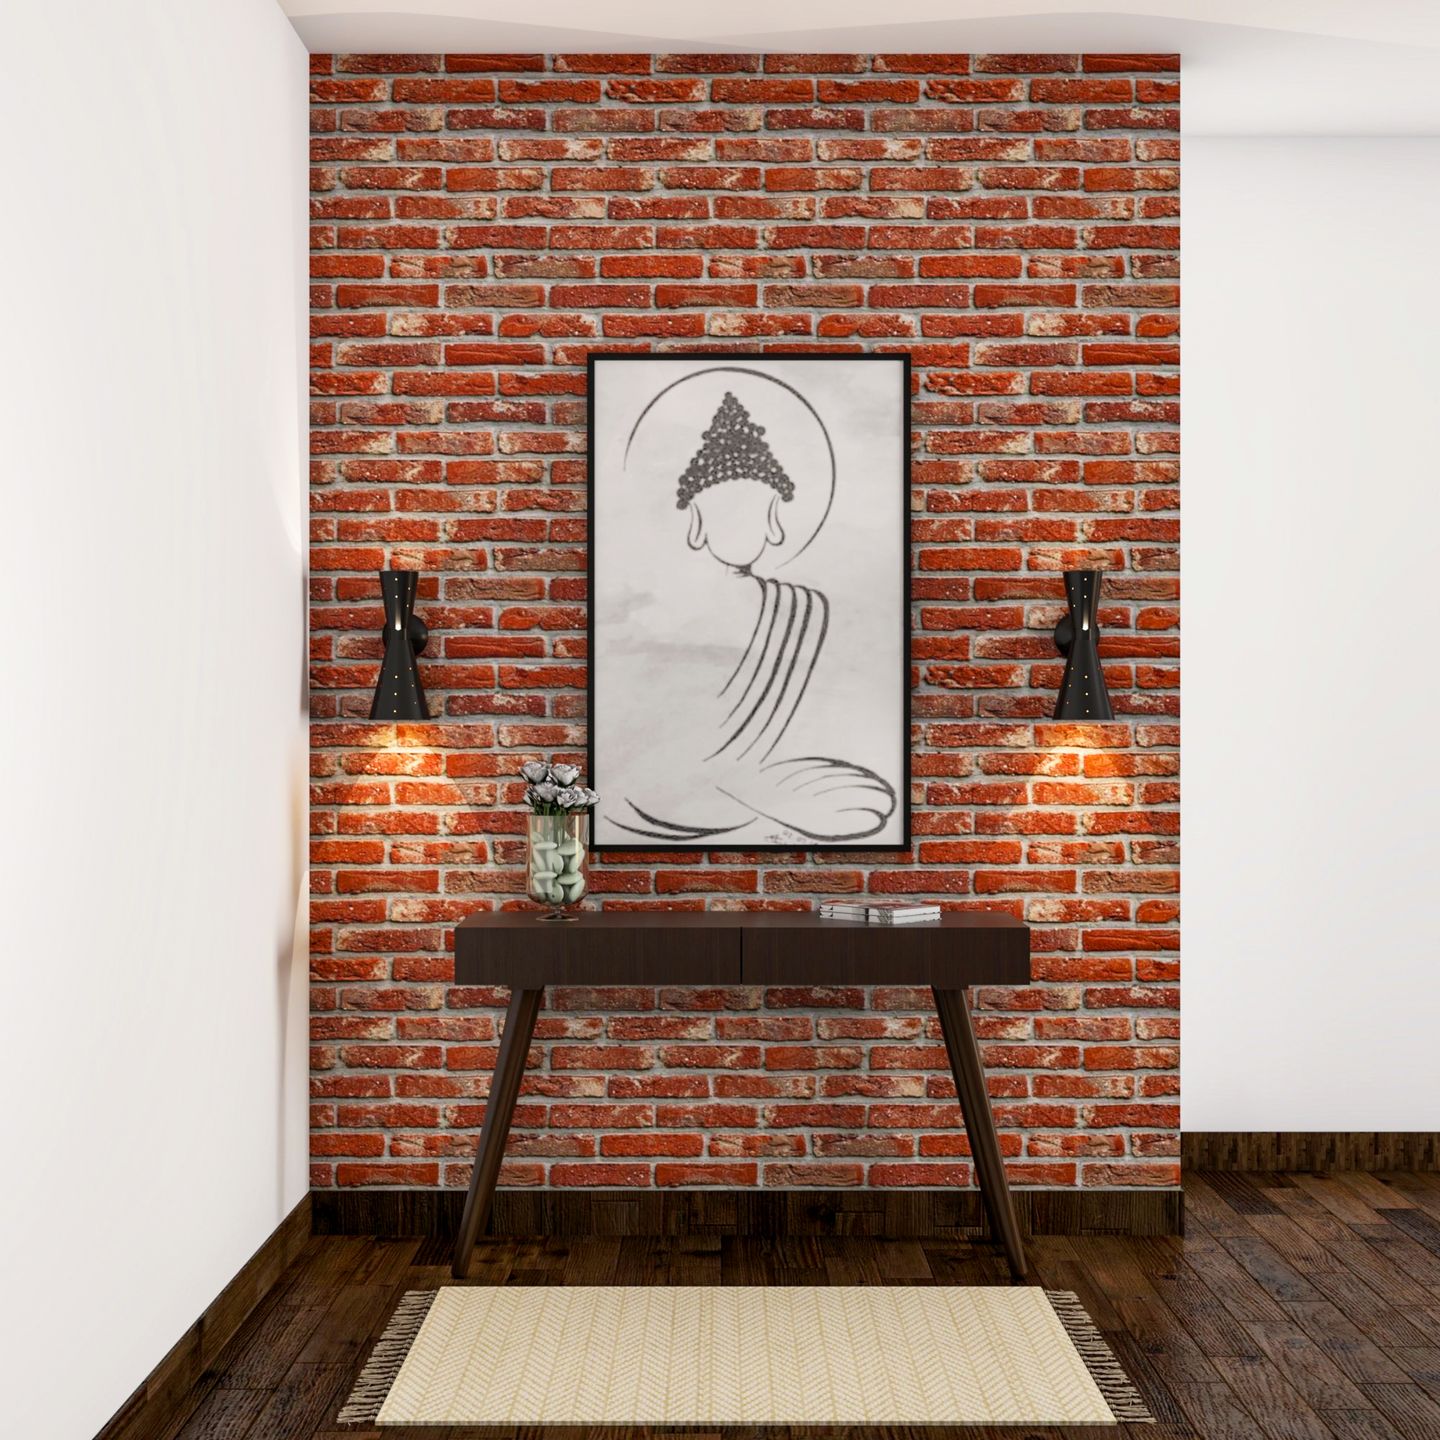 Brick Wall Modern Compact Foyer Design with Buddha Painting - Livspace